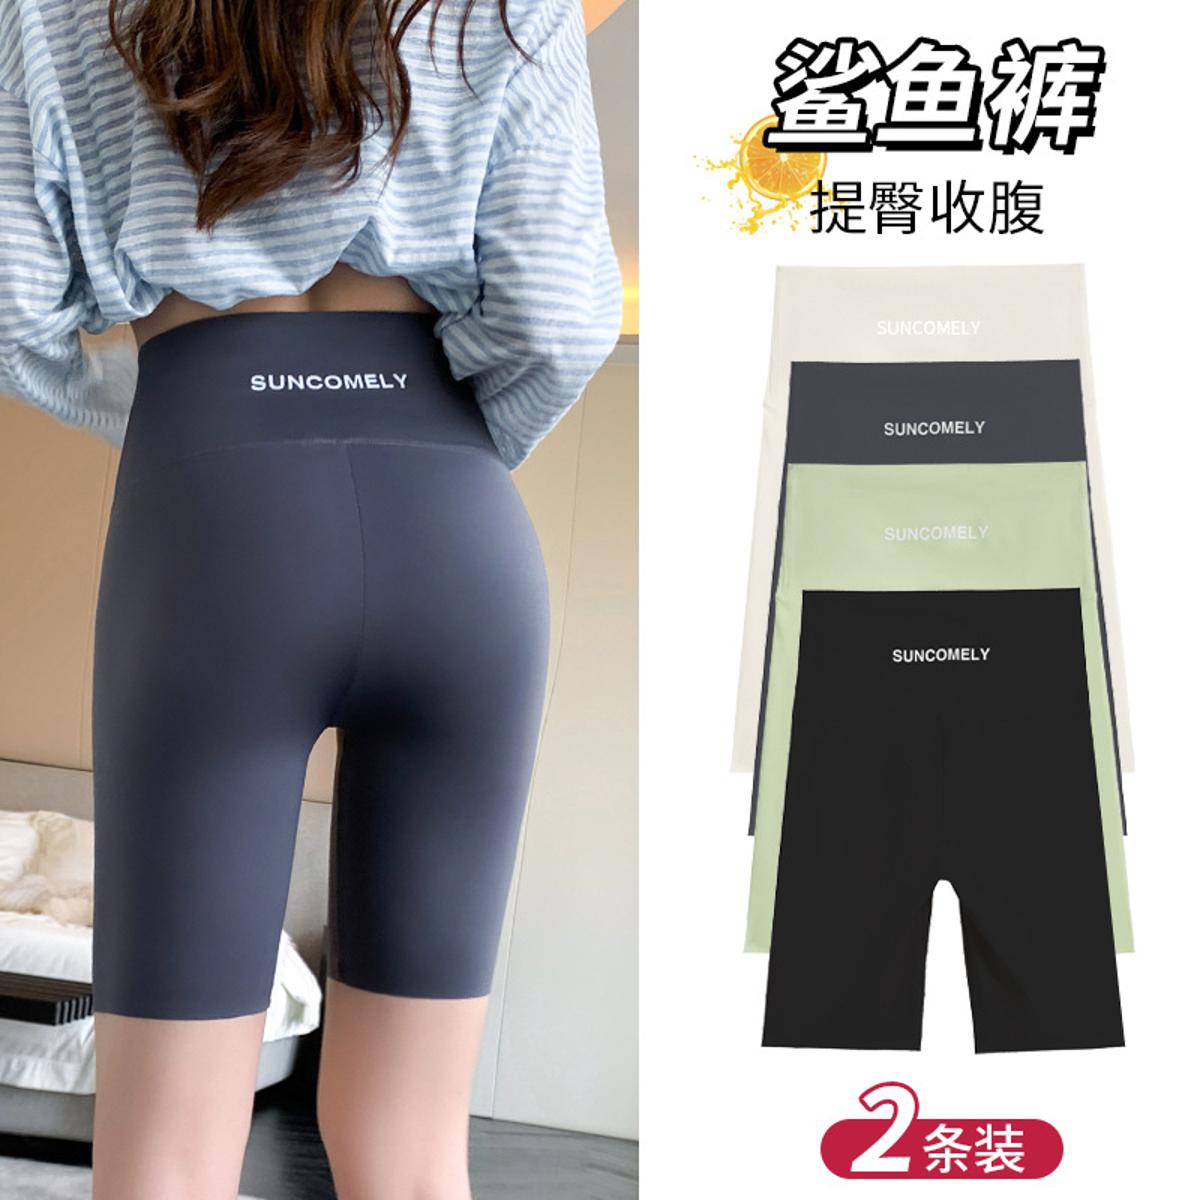 Shark Skin Five-Point Leggings Women's Outer Wear Anti-Exposure Hip Lifting  Thin Tight Summer Yoga Shorts Weight Loss Pants